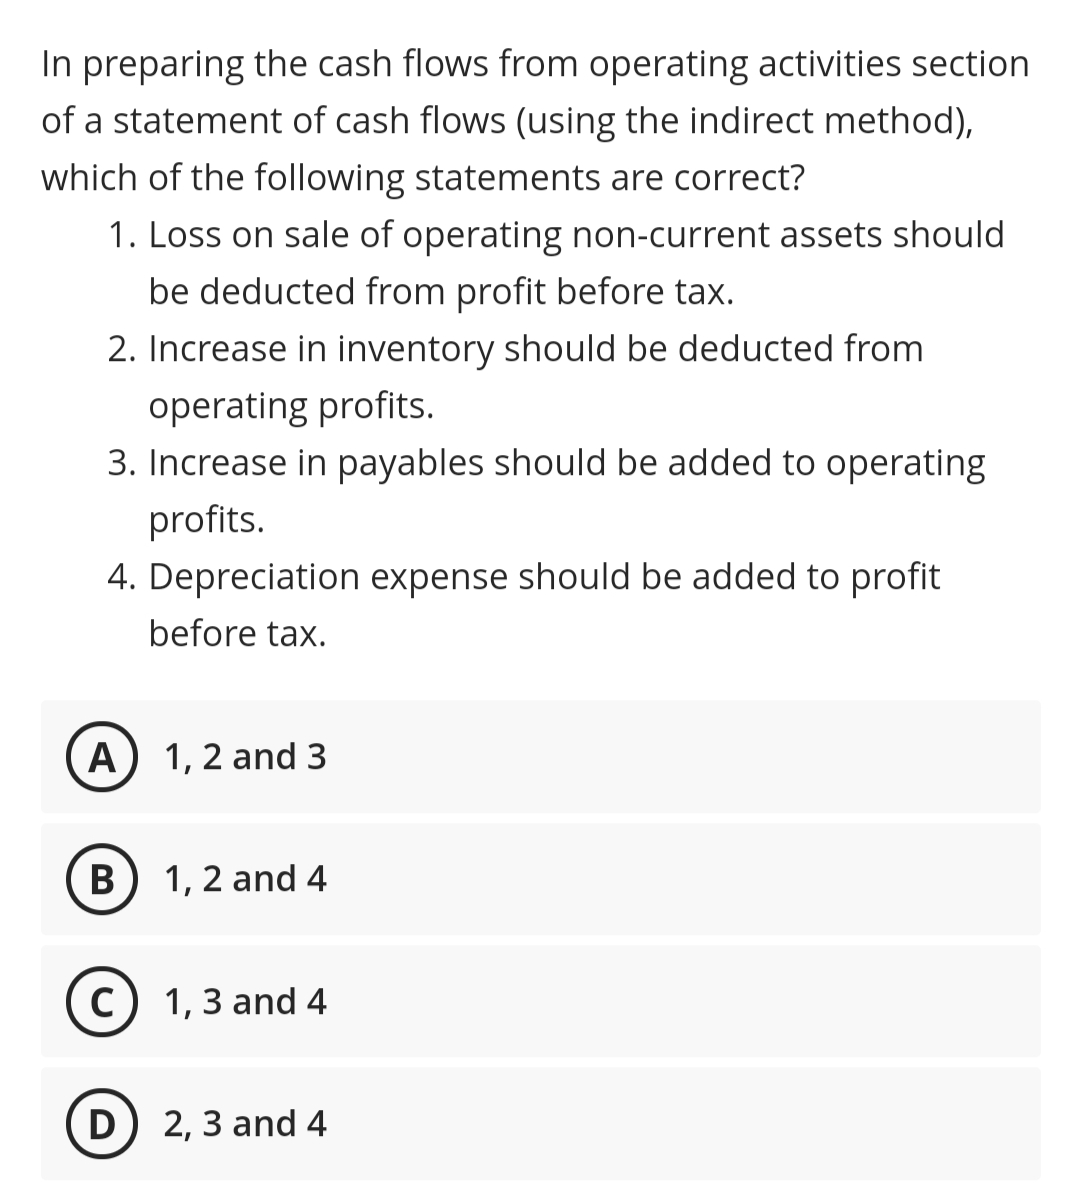 In preparing the cash flows from operating activities section
of a statement of cash flows (using the indirect method),
which of the following statements are correct?
1. Loss on sale of operating non-current assets should
be deducted from profit before tax.
2. Increase in inventory should be deducted from
operating profits.
3. Increase in payables should be added to operating
profits.
4. Depreciation expense should be added to profit
before tax.
A) 1, 2 and 3
B) 1, 2 and 4
C) 1,3 and 4
D) 2, 3 and 4
